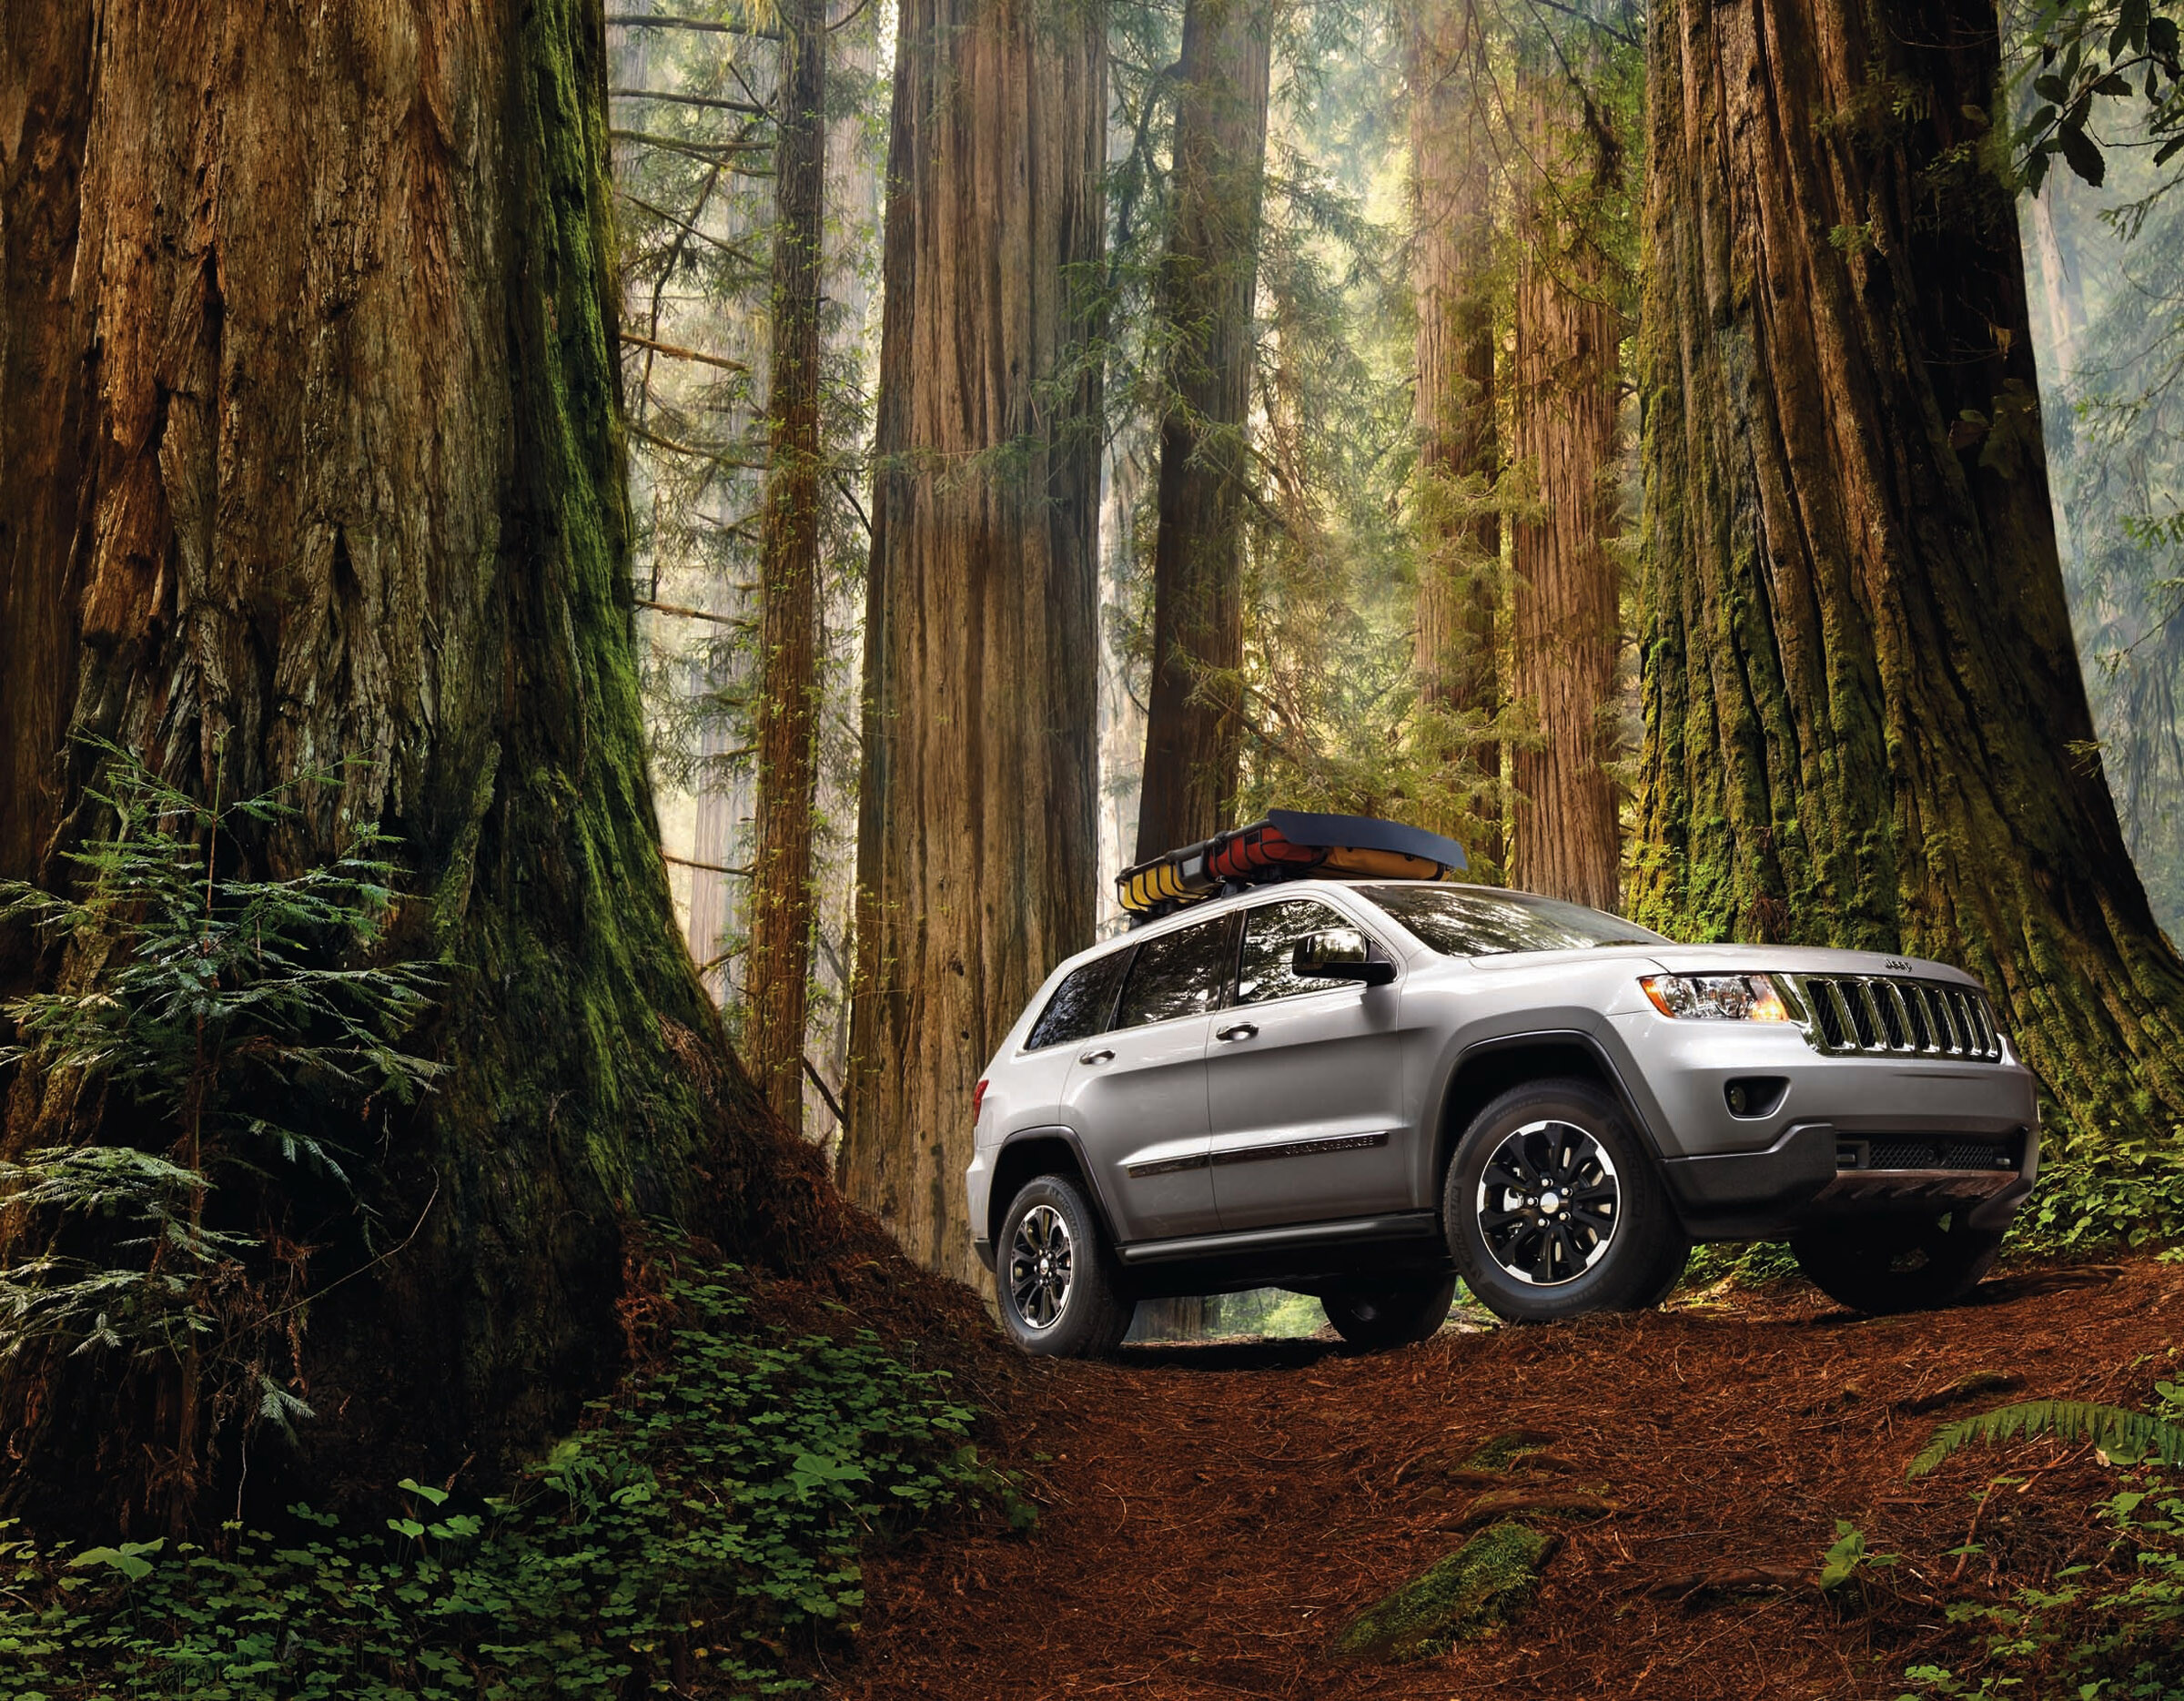 Jeep Grand Cherokee: A performance-based SUV, Advanced off-road capability. 2400x1870 HD Background.